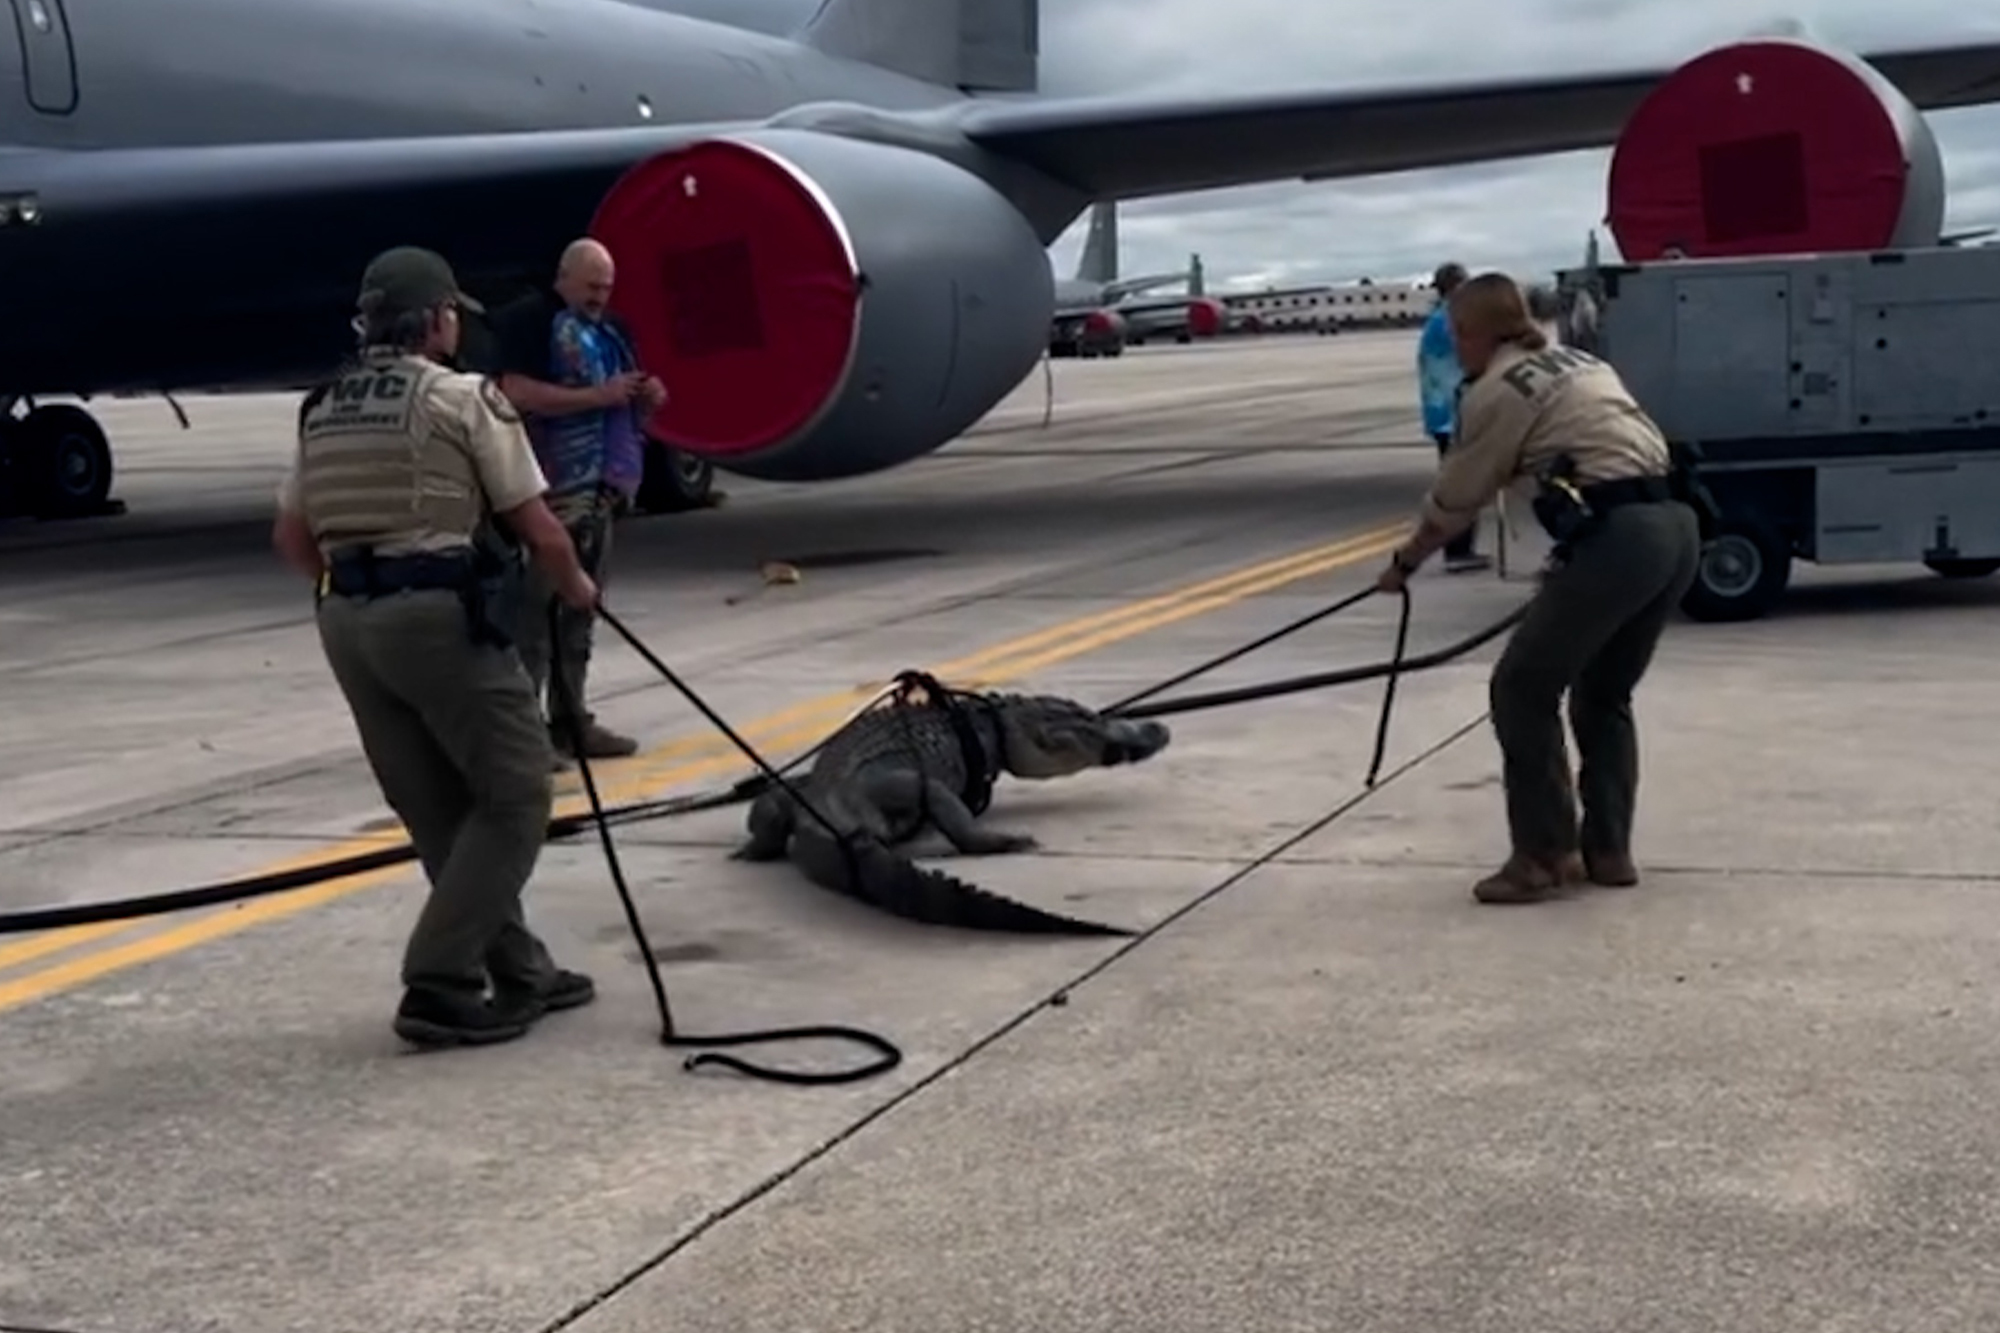 Wild video shows authorities wrangle massive gator that wandered onto Air Force Base tarmac (Video)